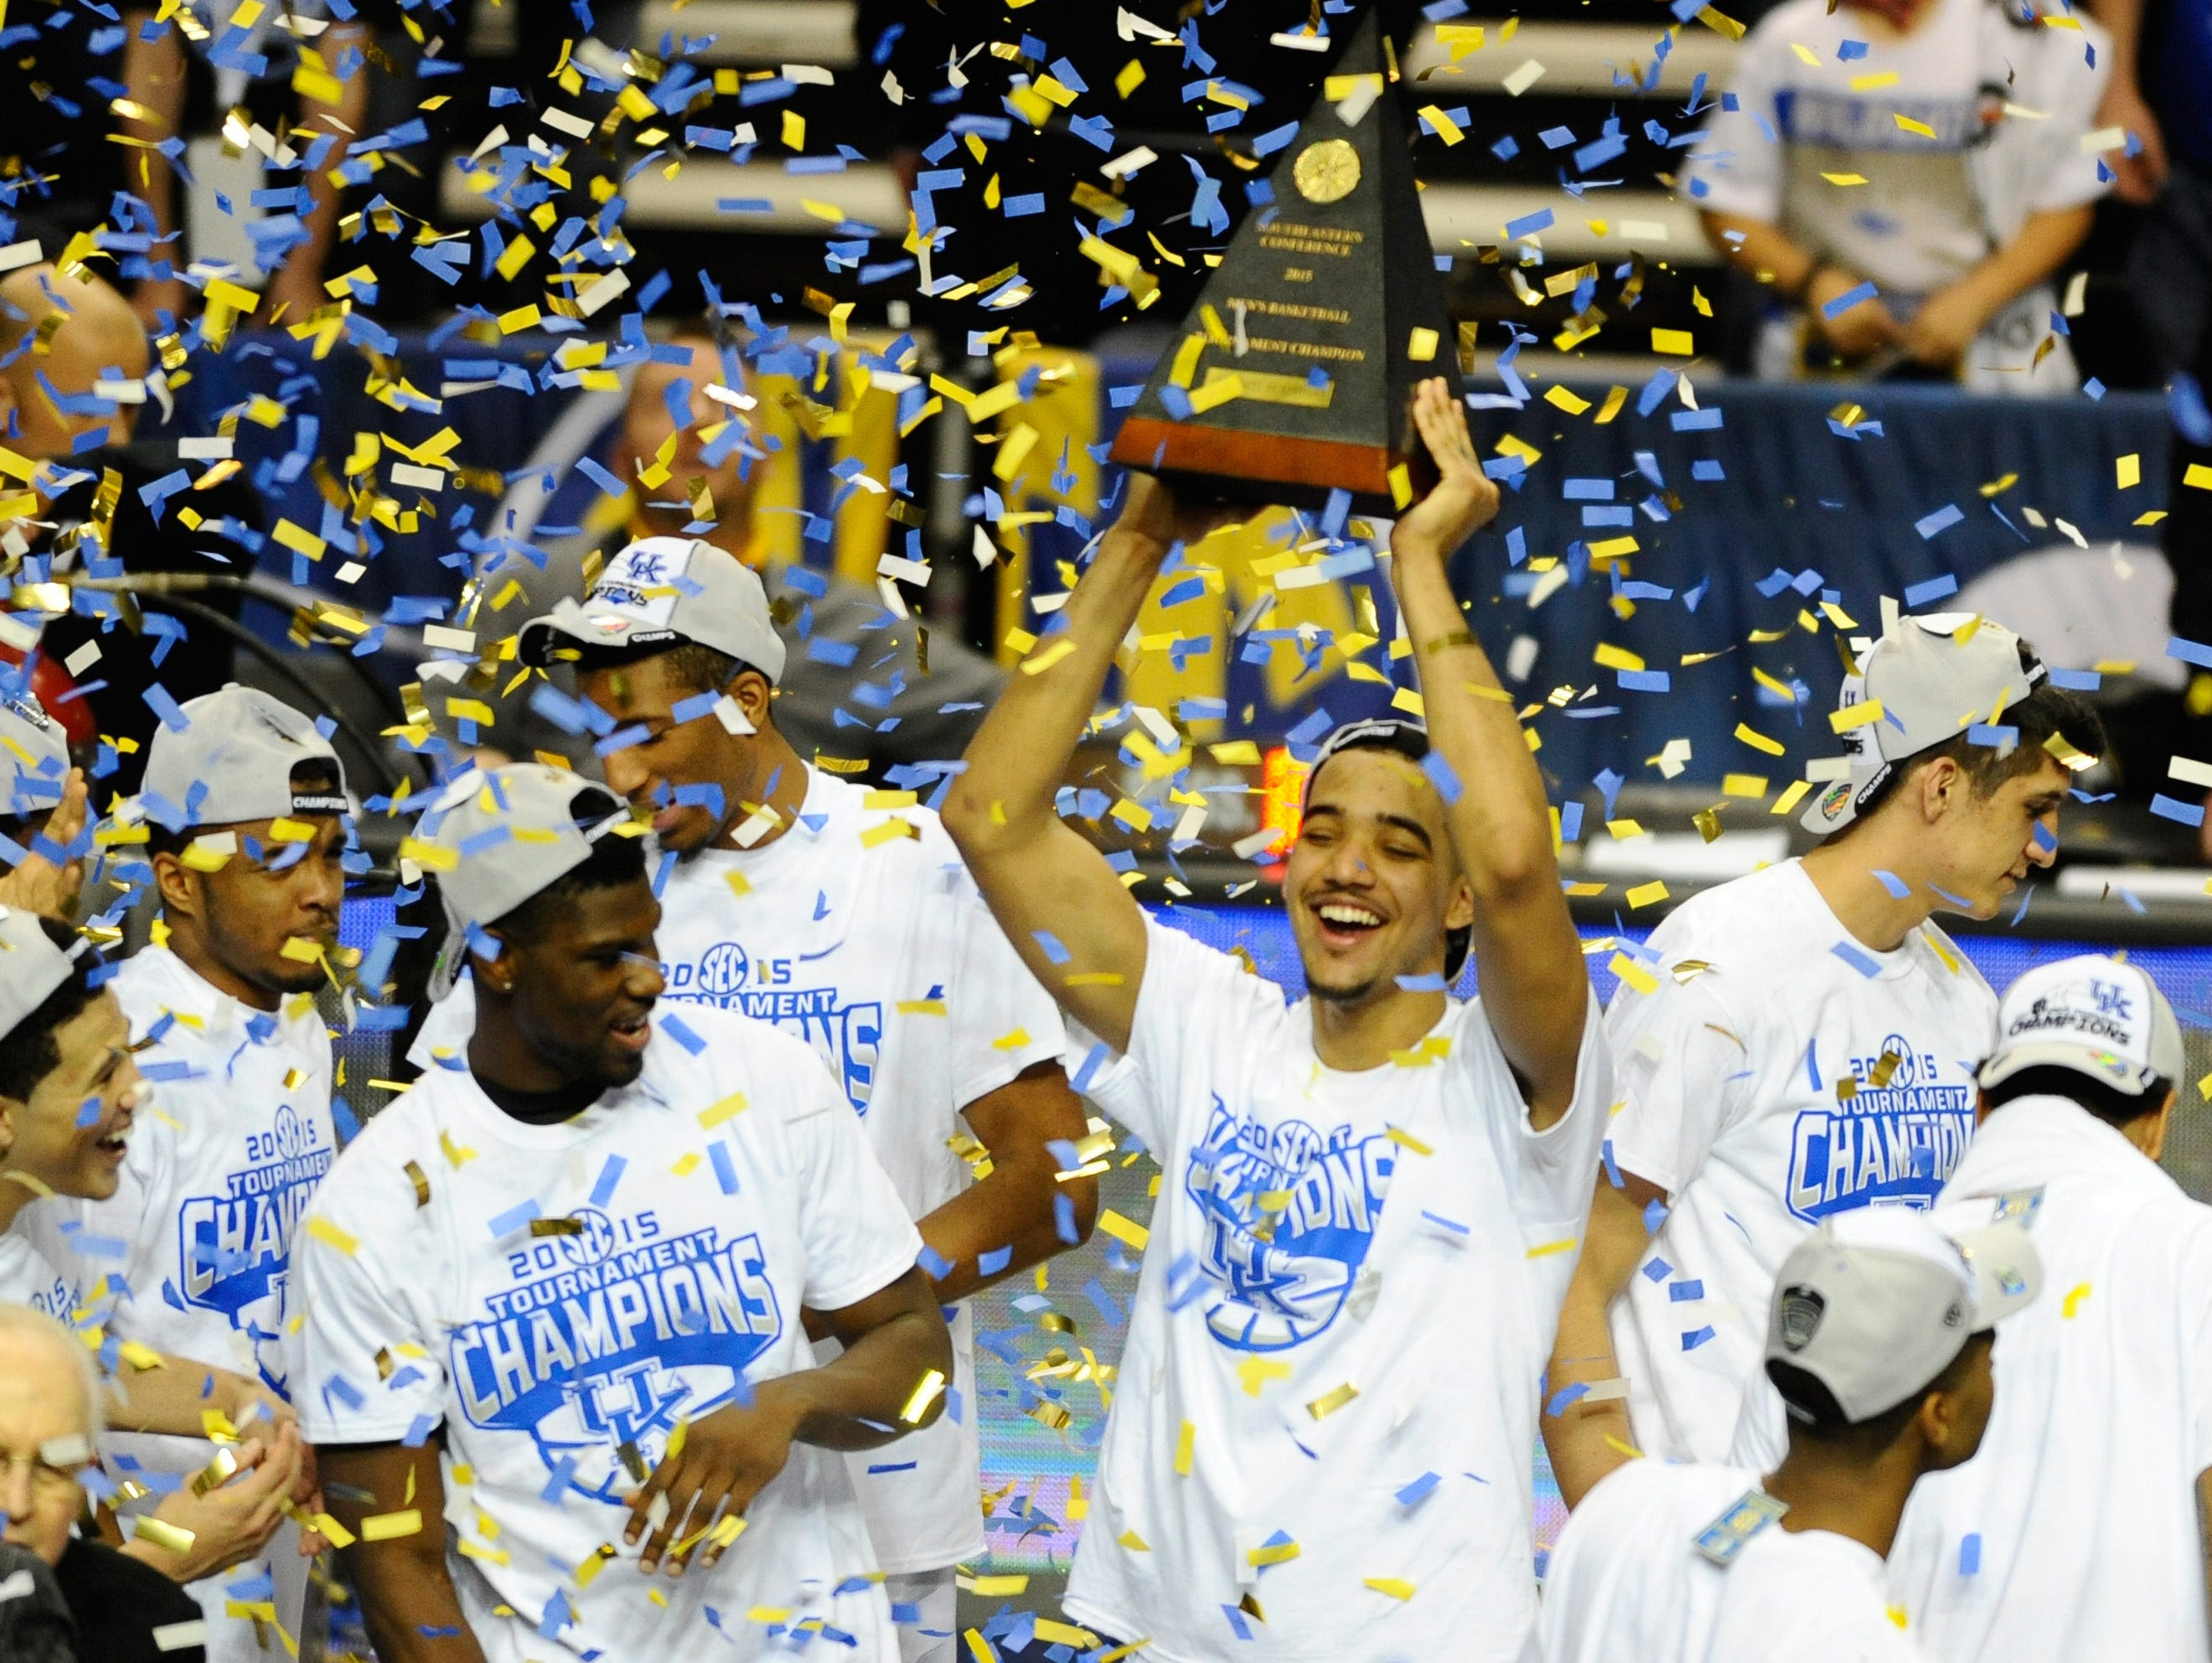 Kentucky players celebrate with the championship trophy after winning the SEC Conference Championship game against Arkansas.